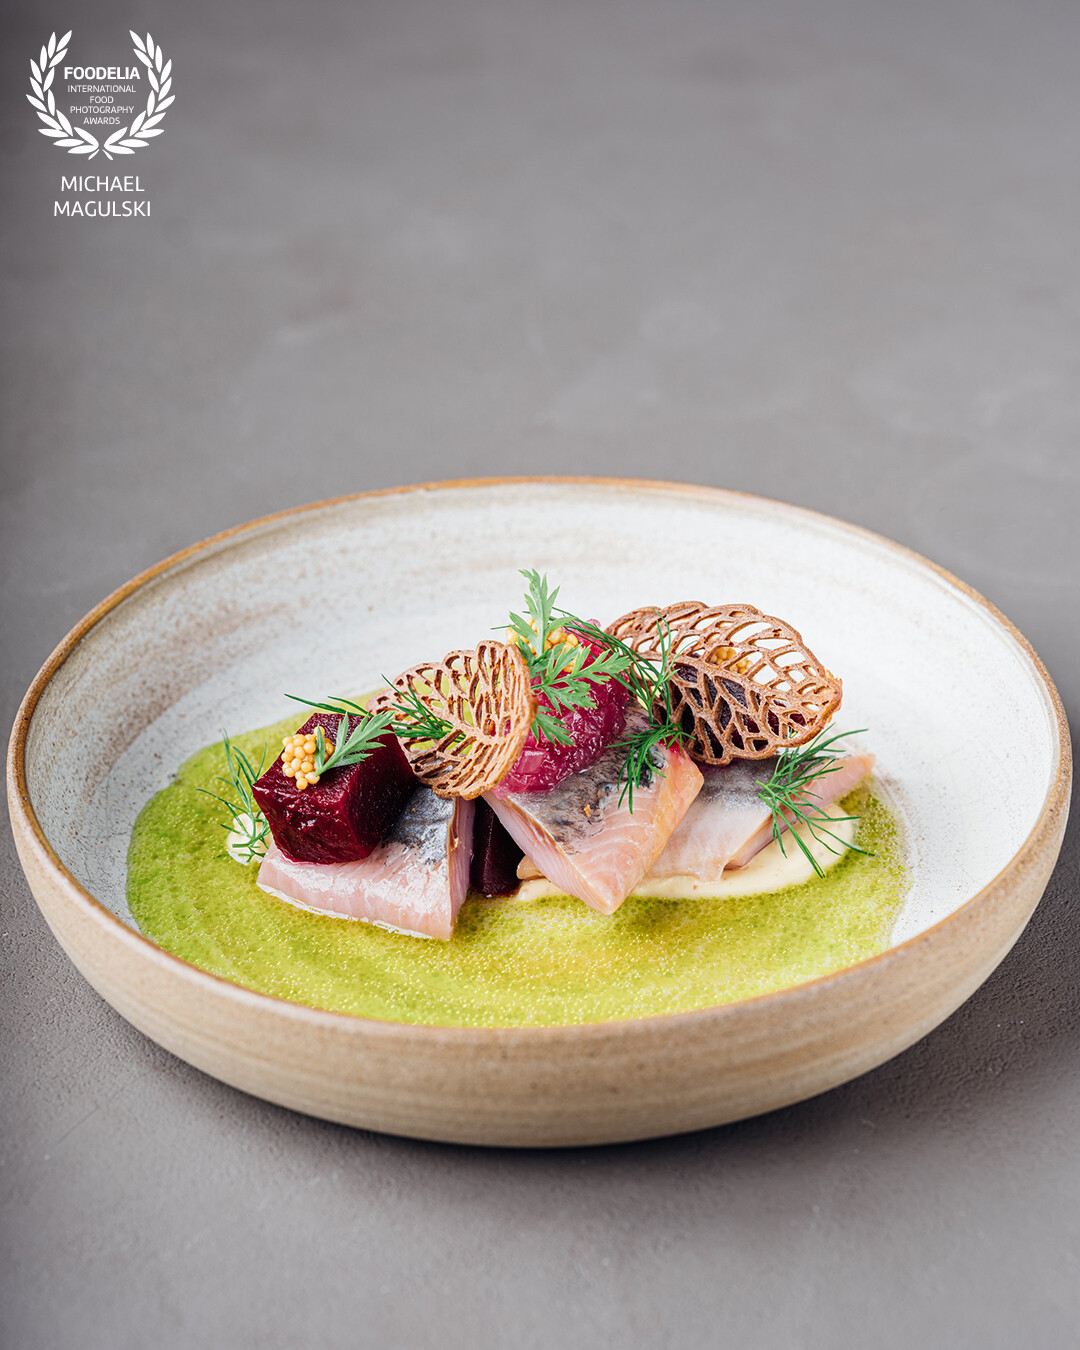 a North German traditional dish, prepared by star chef Holger Bodendorf. Matjes Sylter art